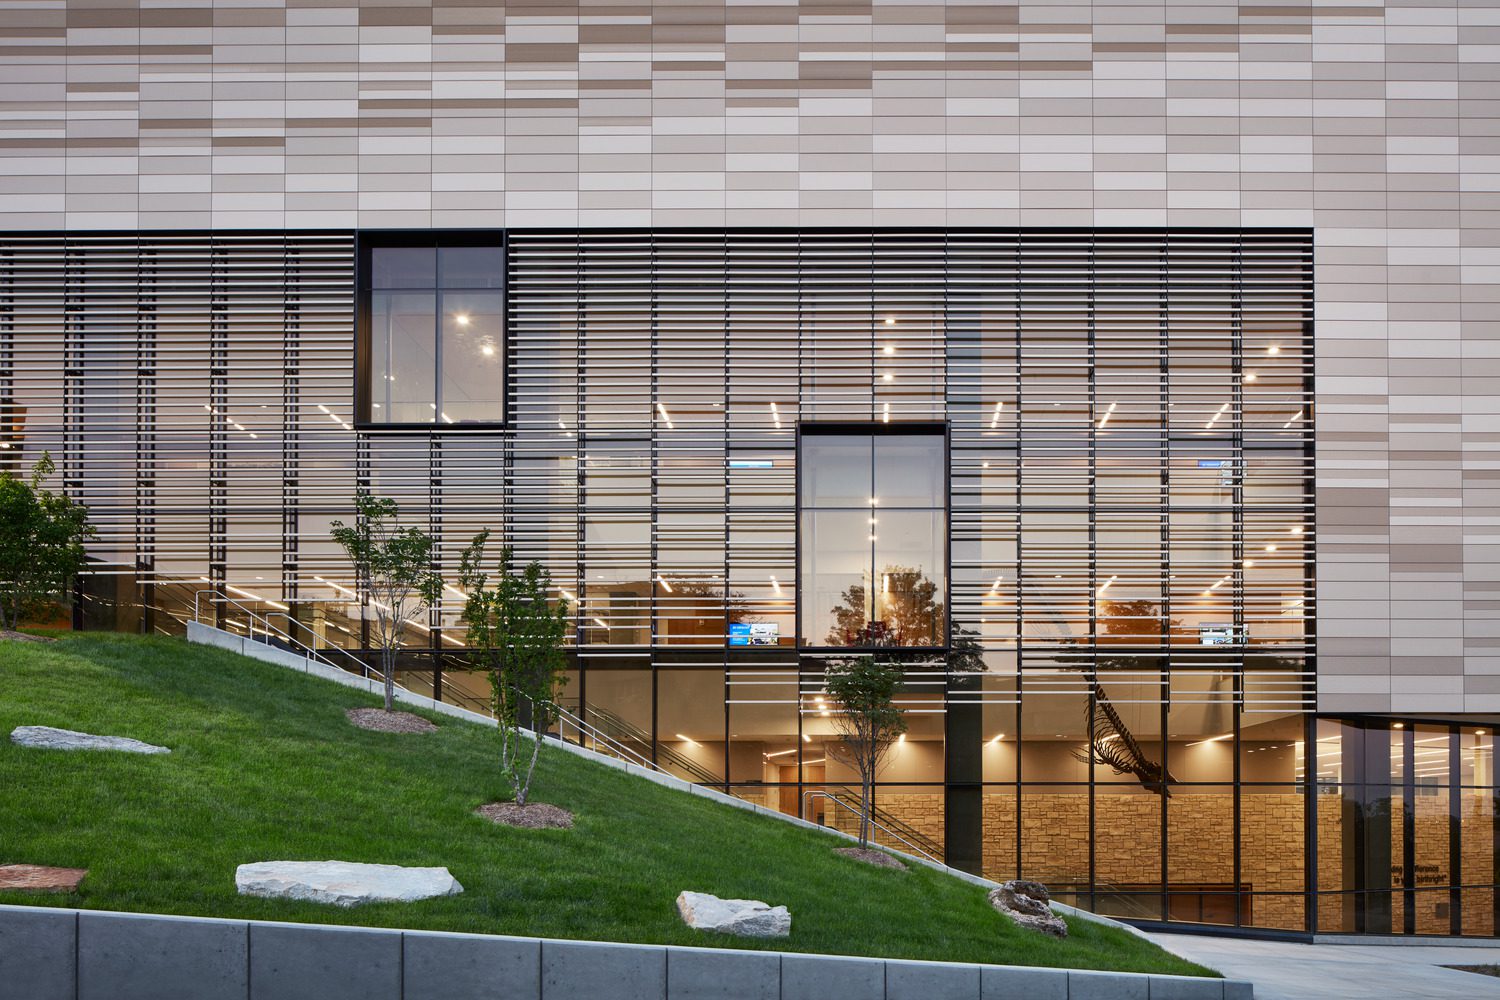 Image of a detail of the exterior glazing and scrim of the KU Earth, Energy & Environment Center